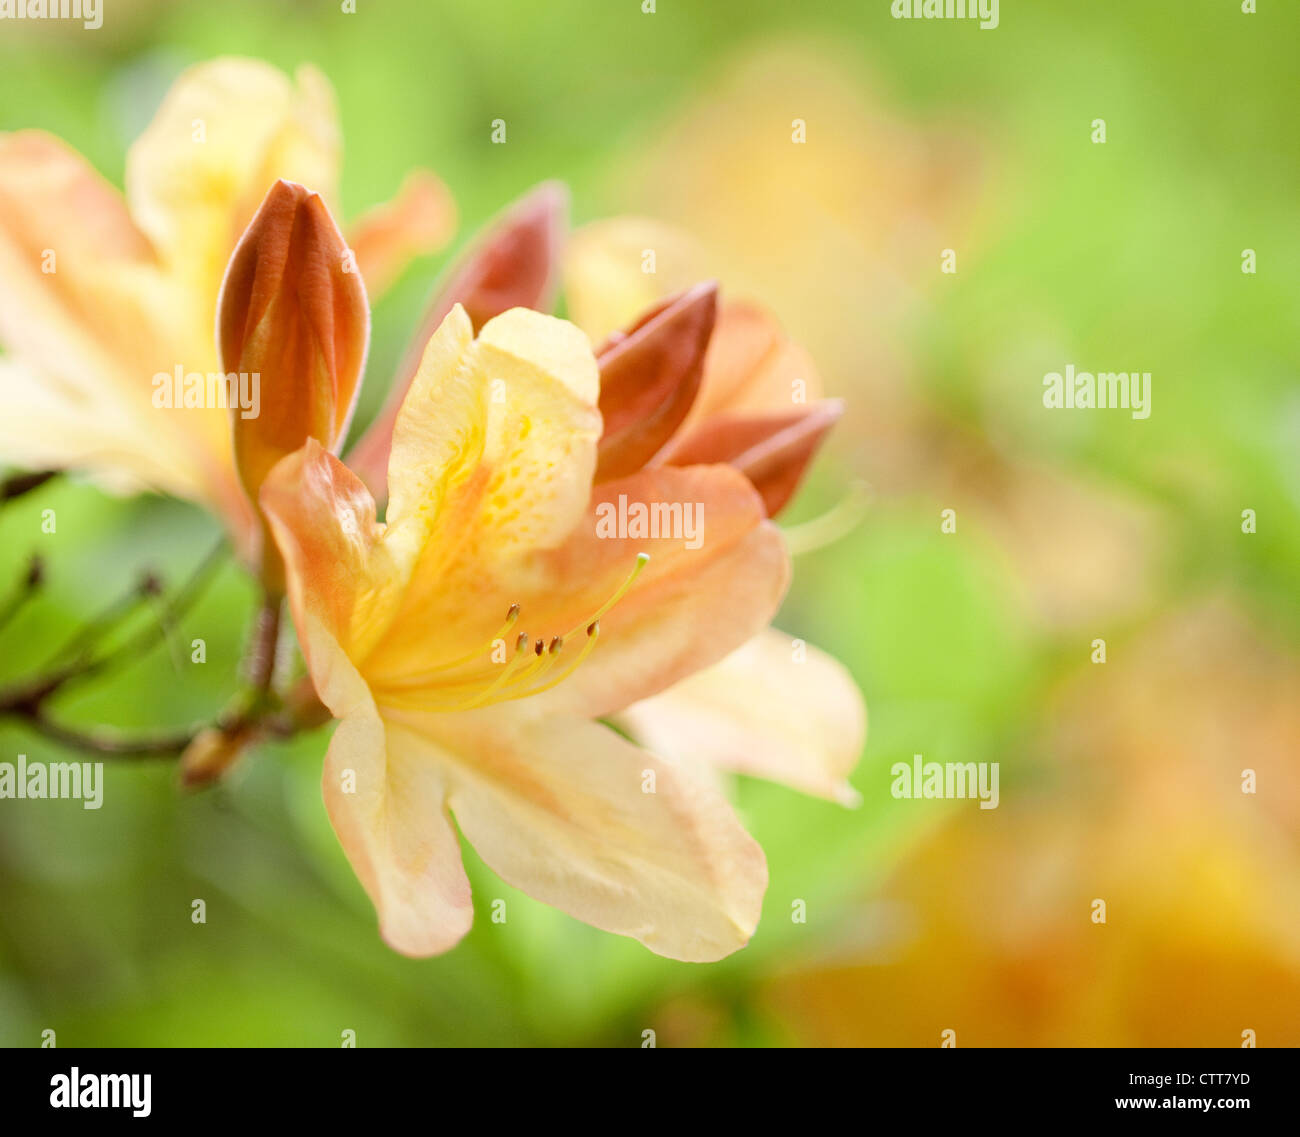 Rhododendron cultivar, Rhododendron, Orange. Stock Photo